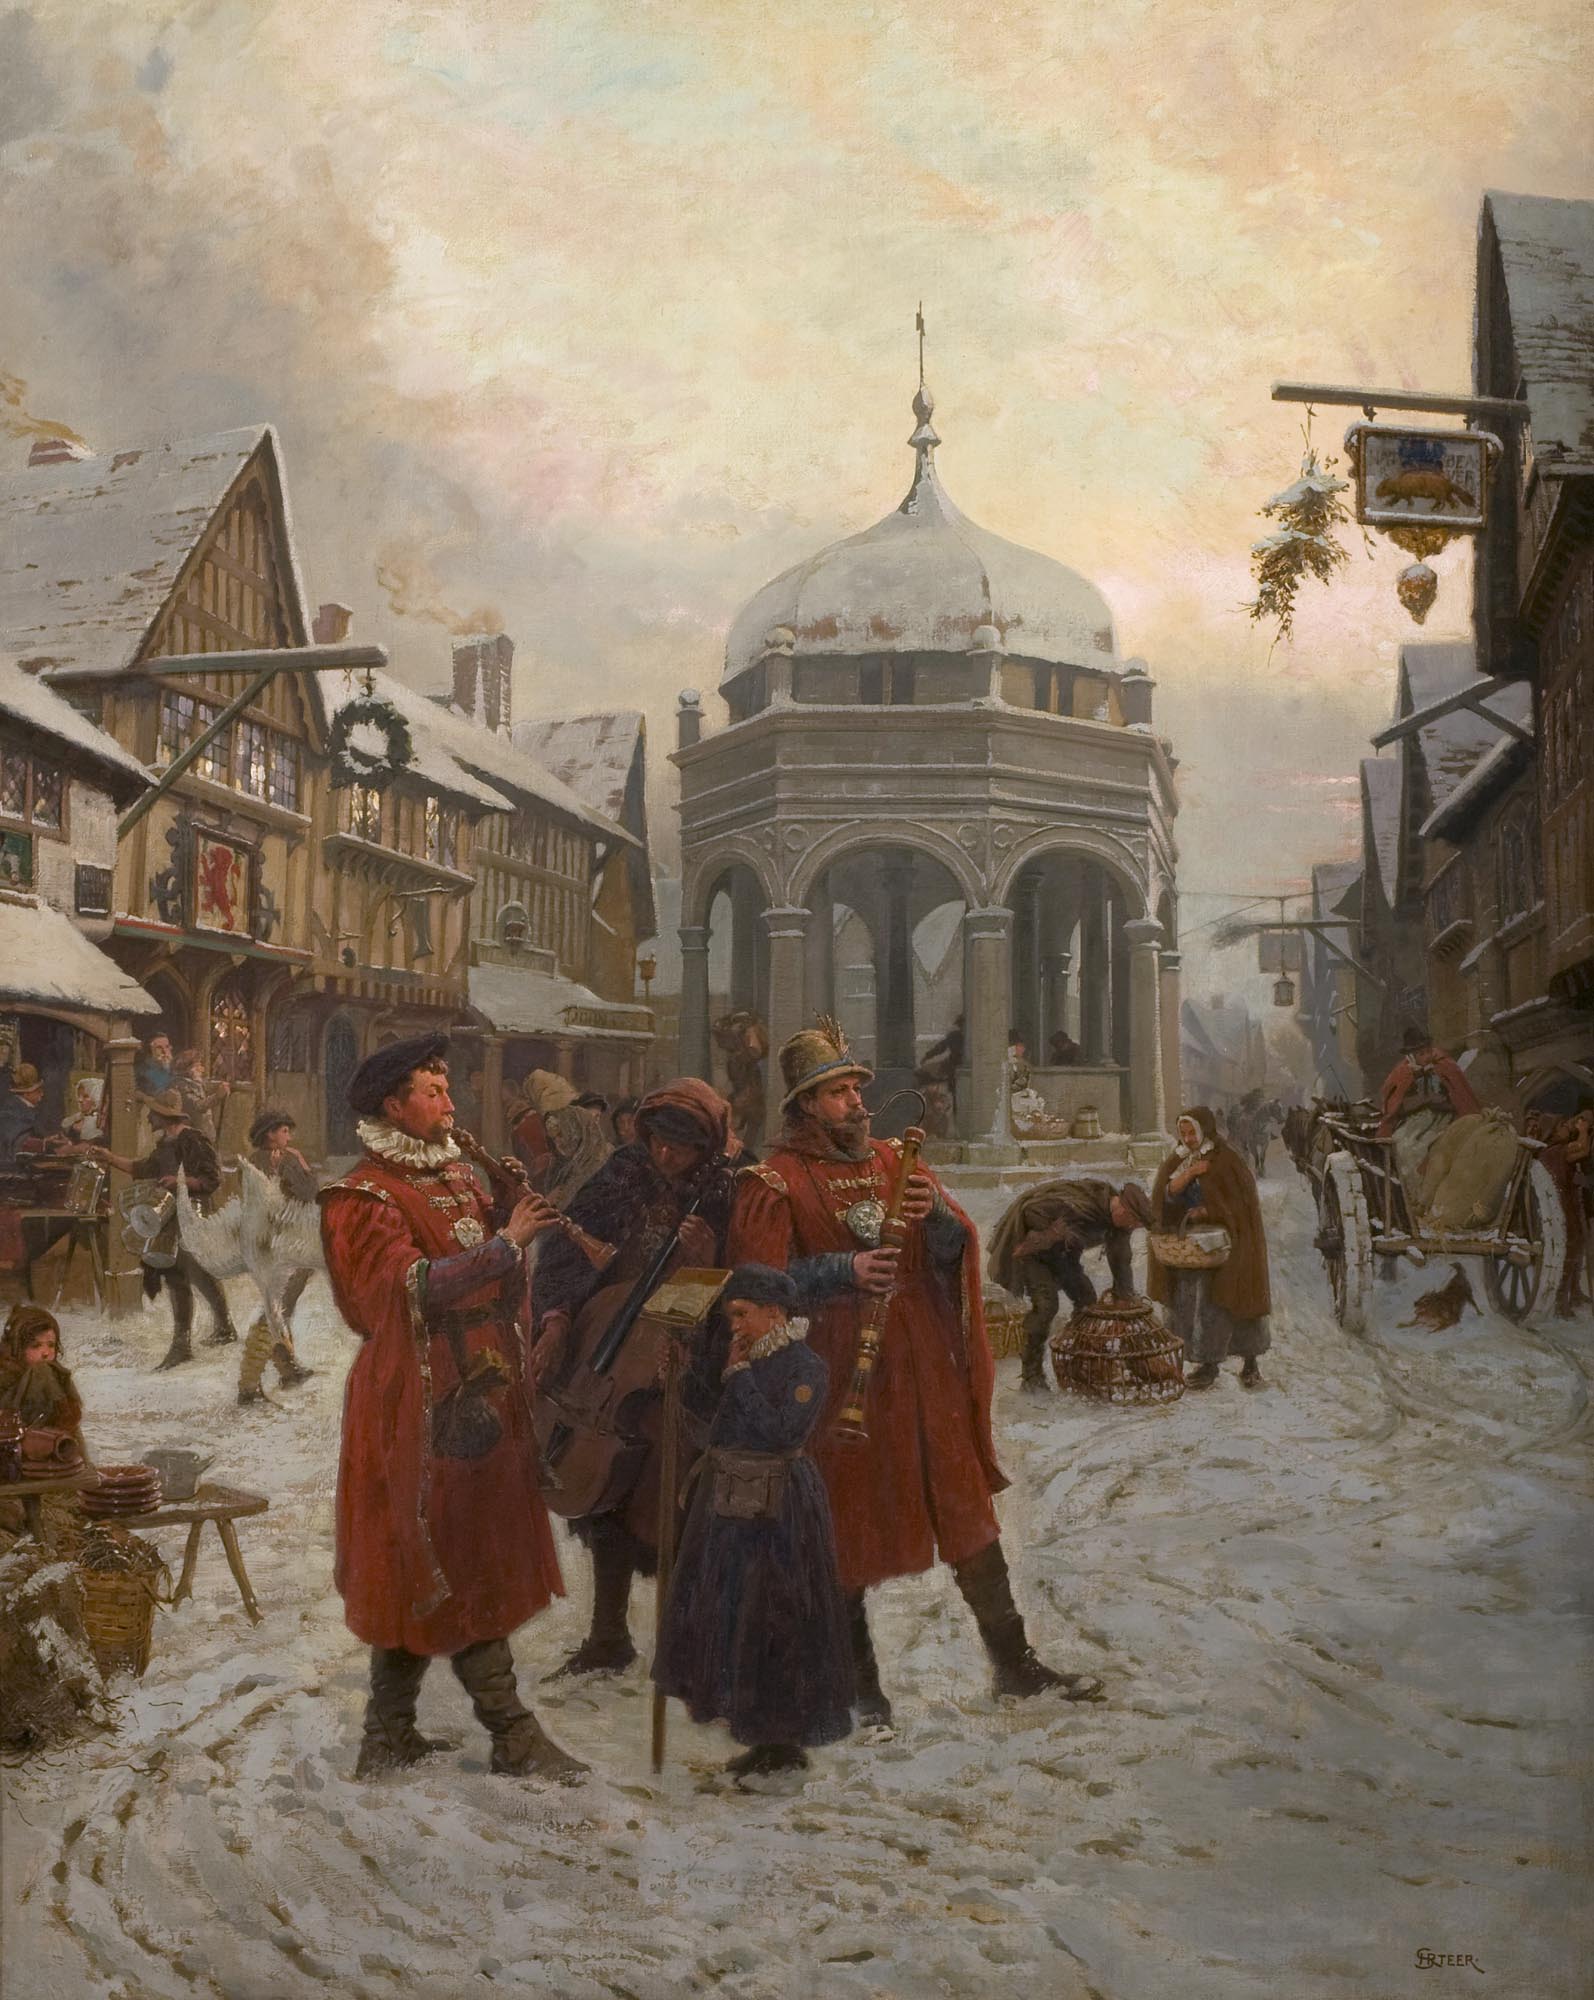 ‘Christmas Eve, Highcross Market, Leicester 16th century’ oil painting, 1900, by Henry Reynolds Steer -